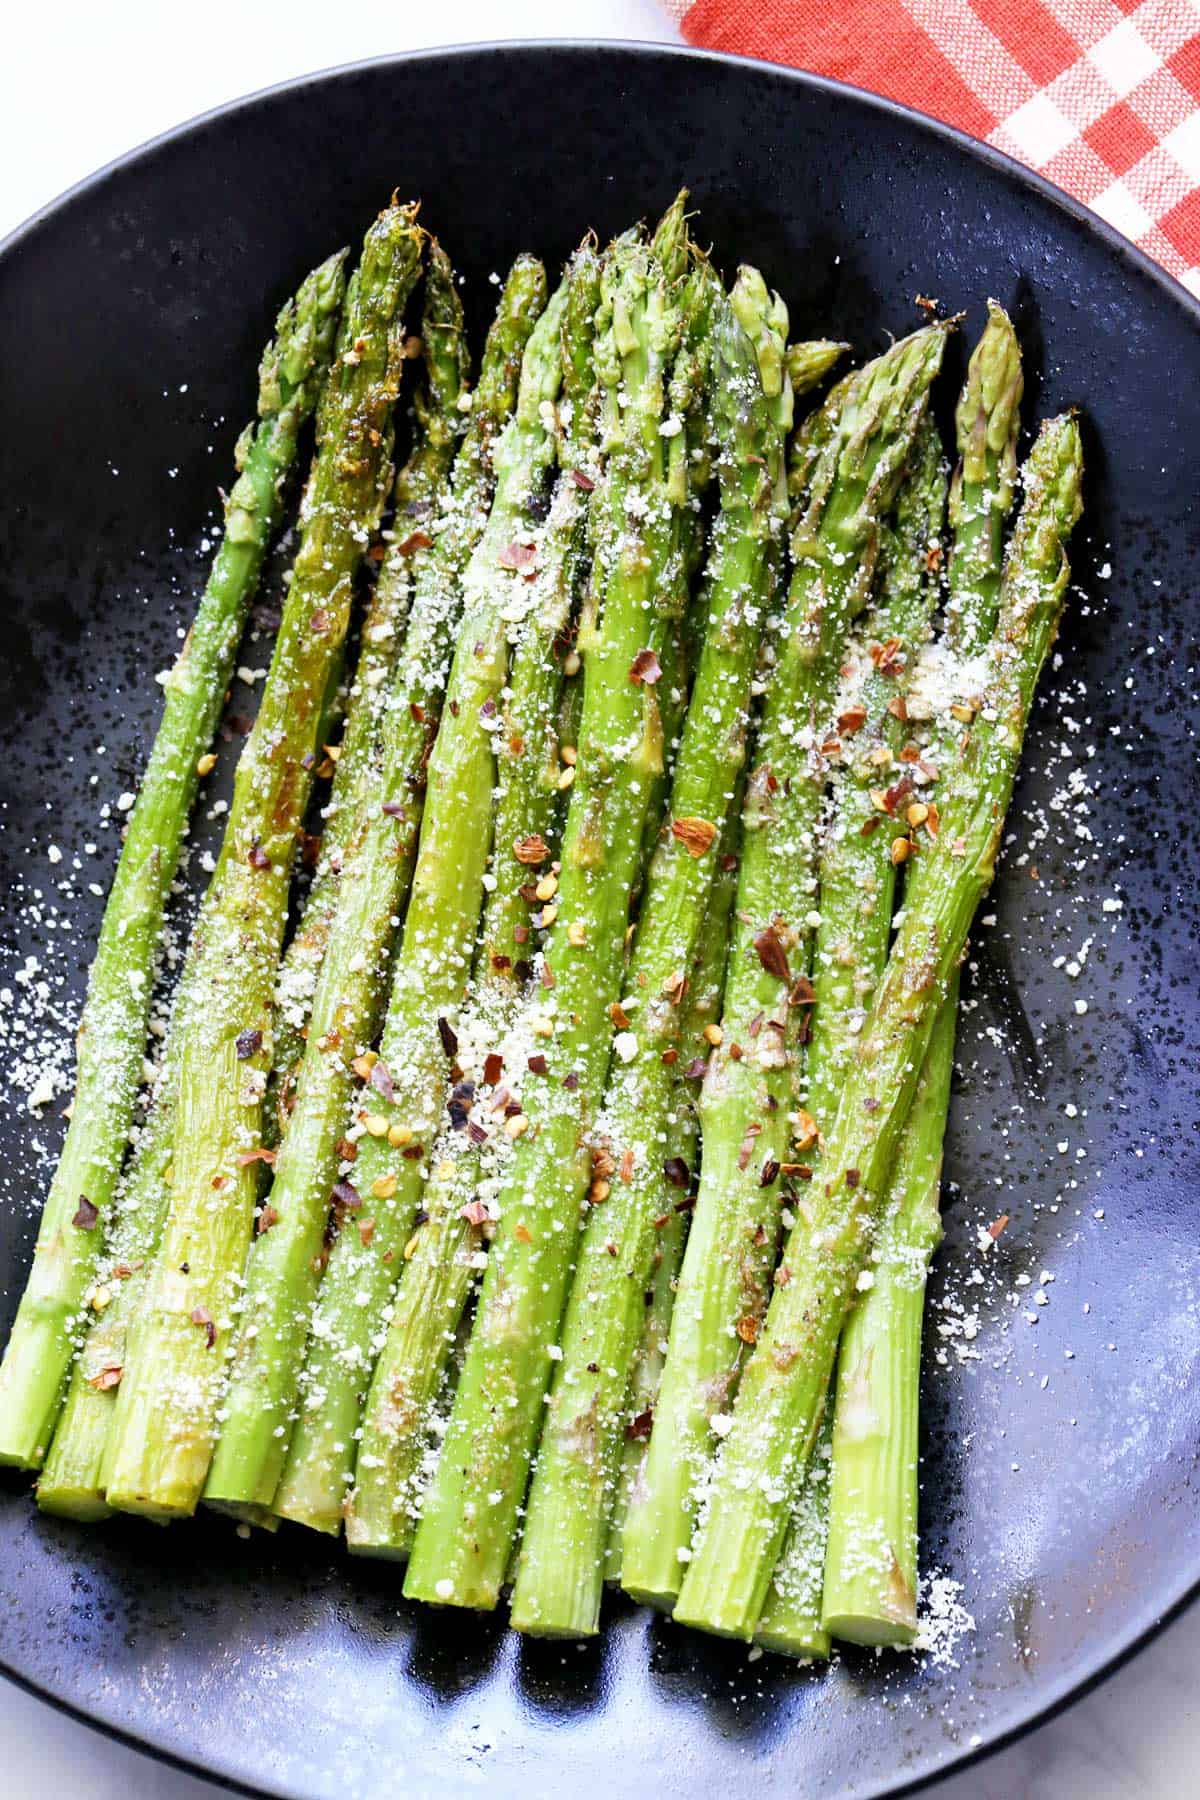 Roasted asparagus is served on a black plate, sprinkled with parmesan and red pepper flakes. 